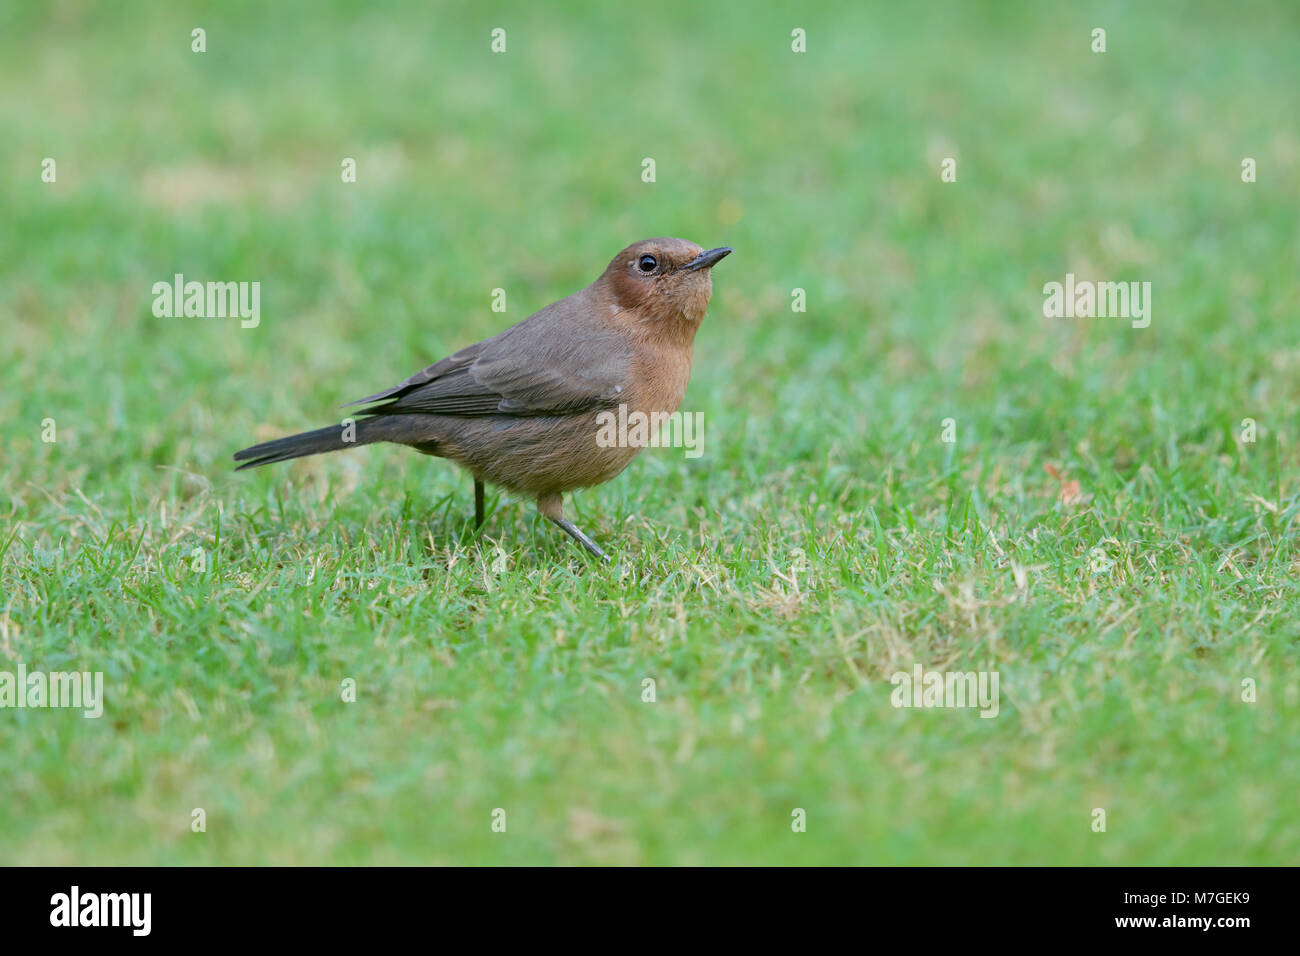 An adult Brown Rock Chat (Oenanthe fusca) bird perched in a garden in Nawalgarh, Rajasthan, India Stock Photo